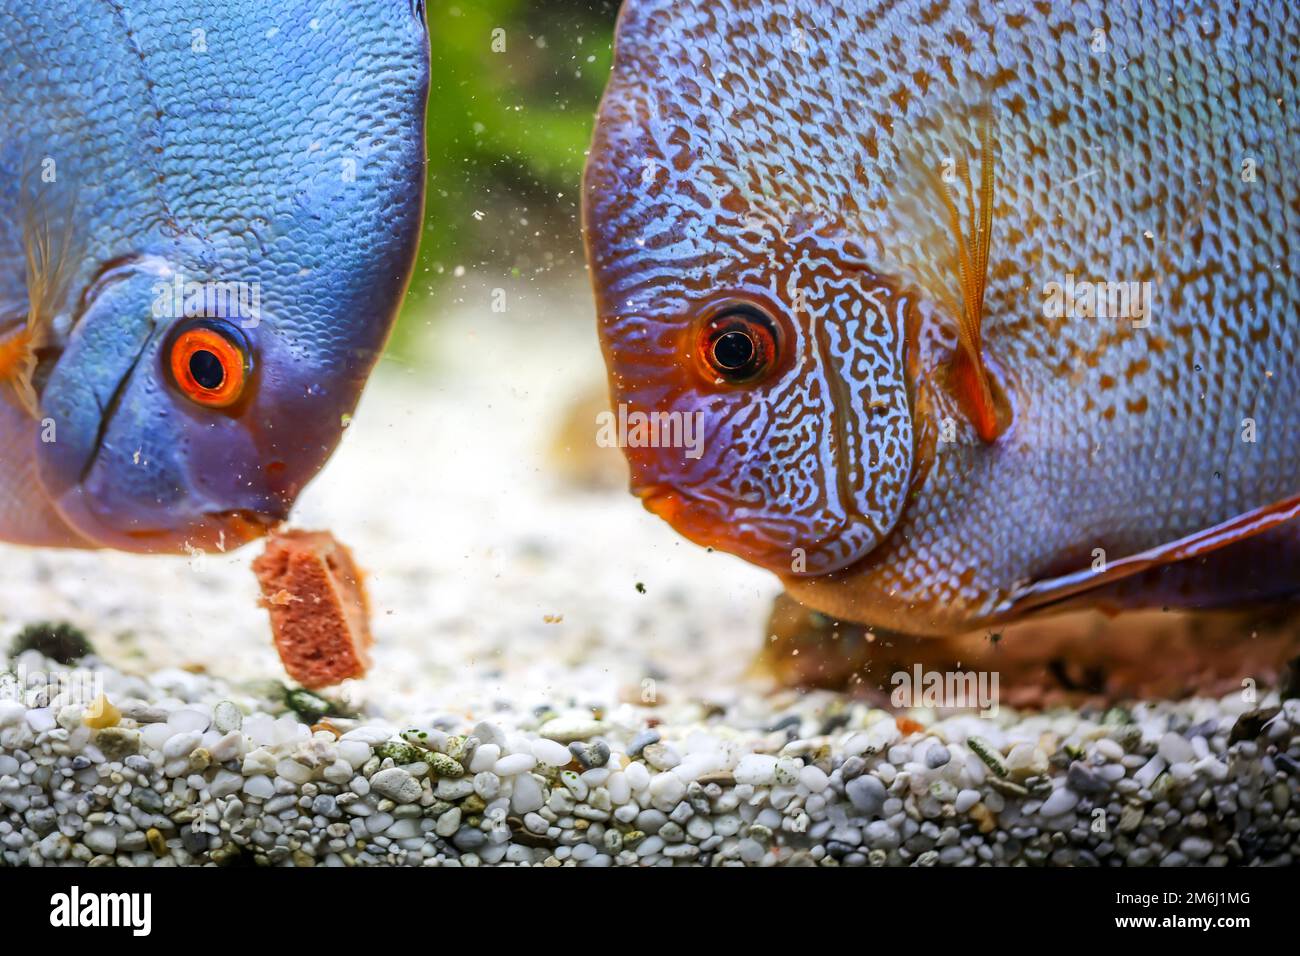 Discus fish, discus cichlids at feeding time. They bite off the food and blow it out. Stock Photo